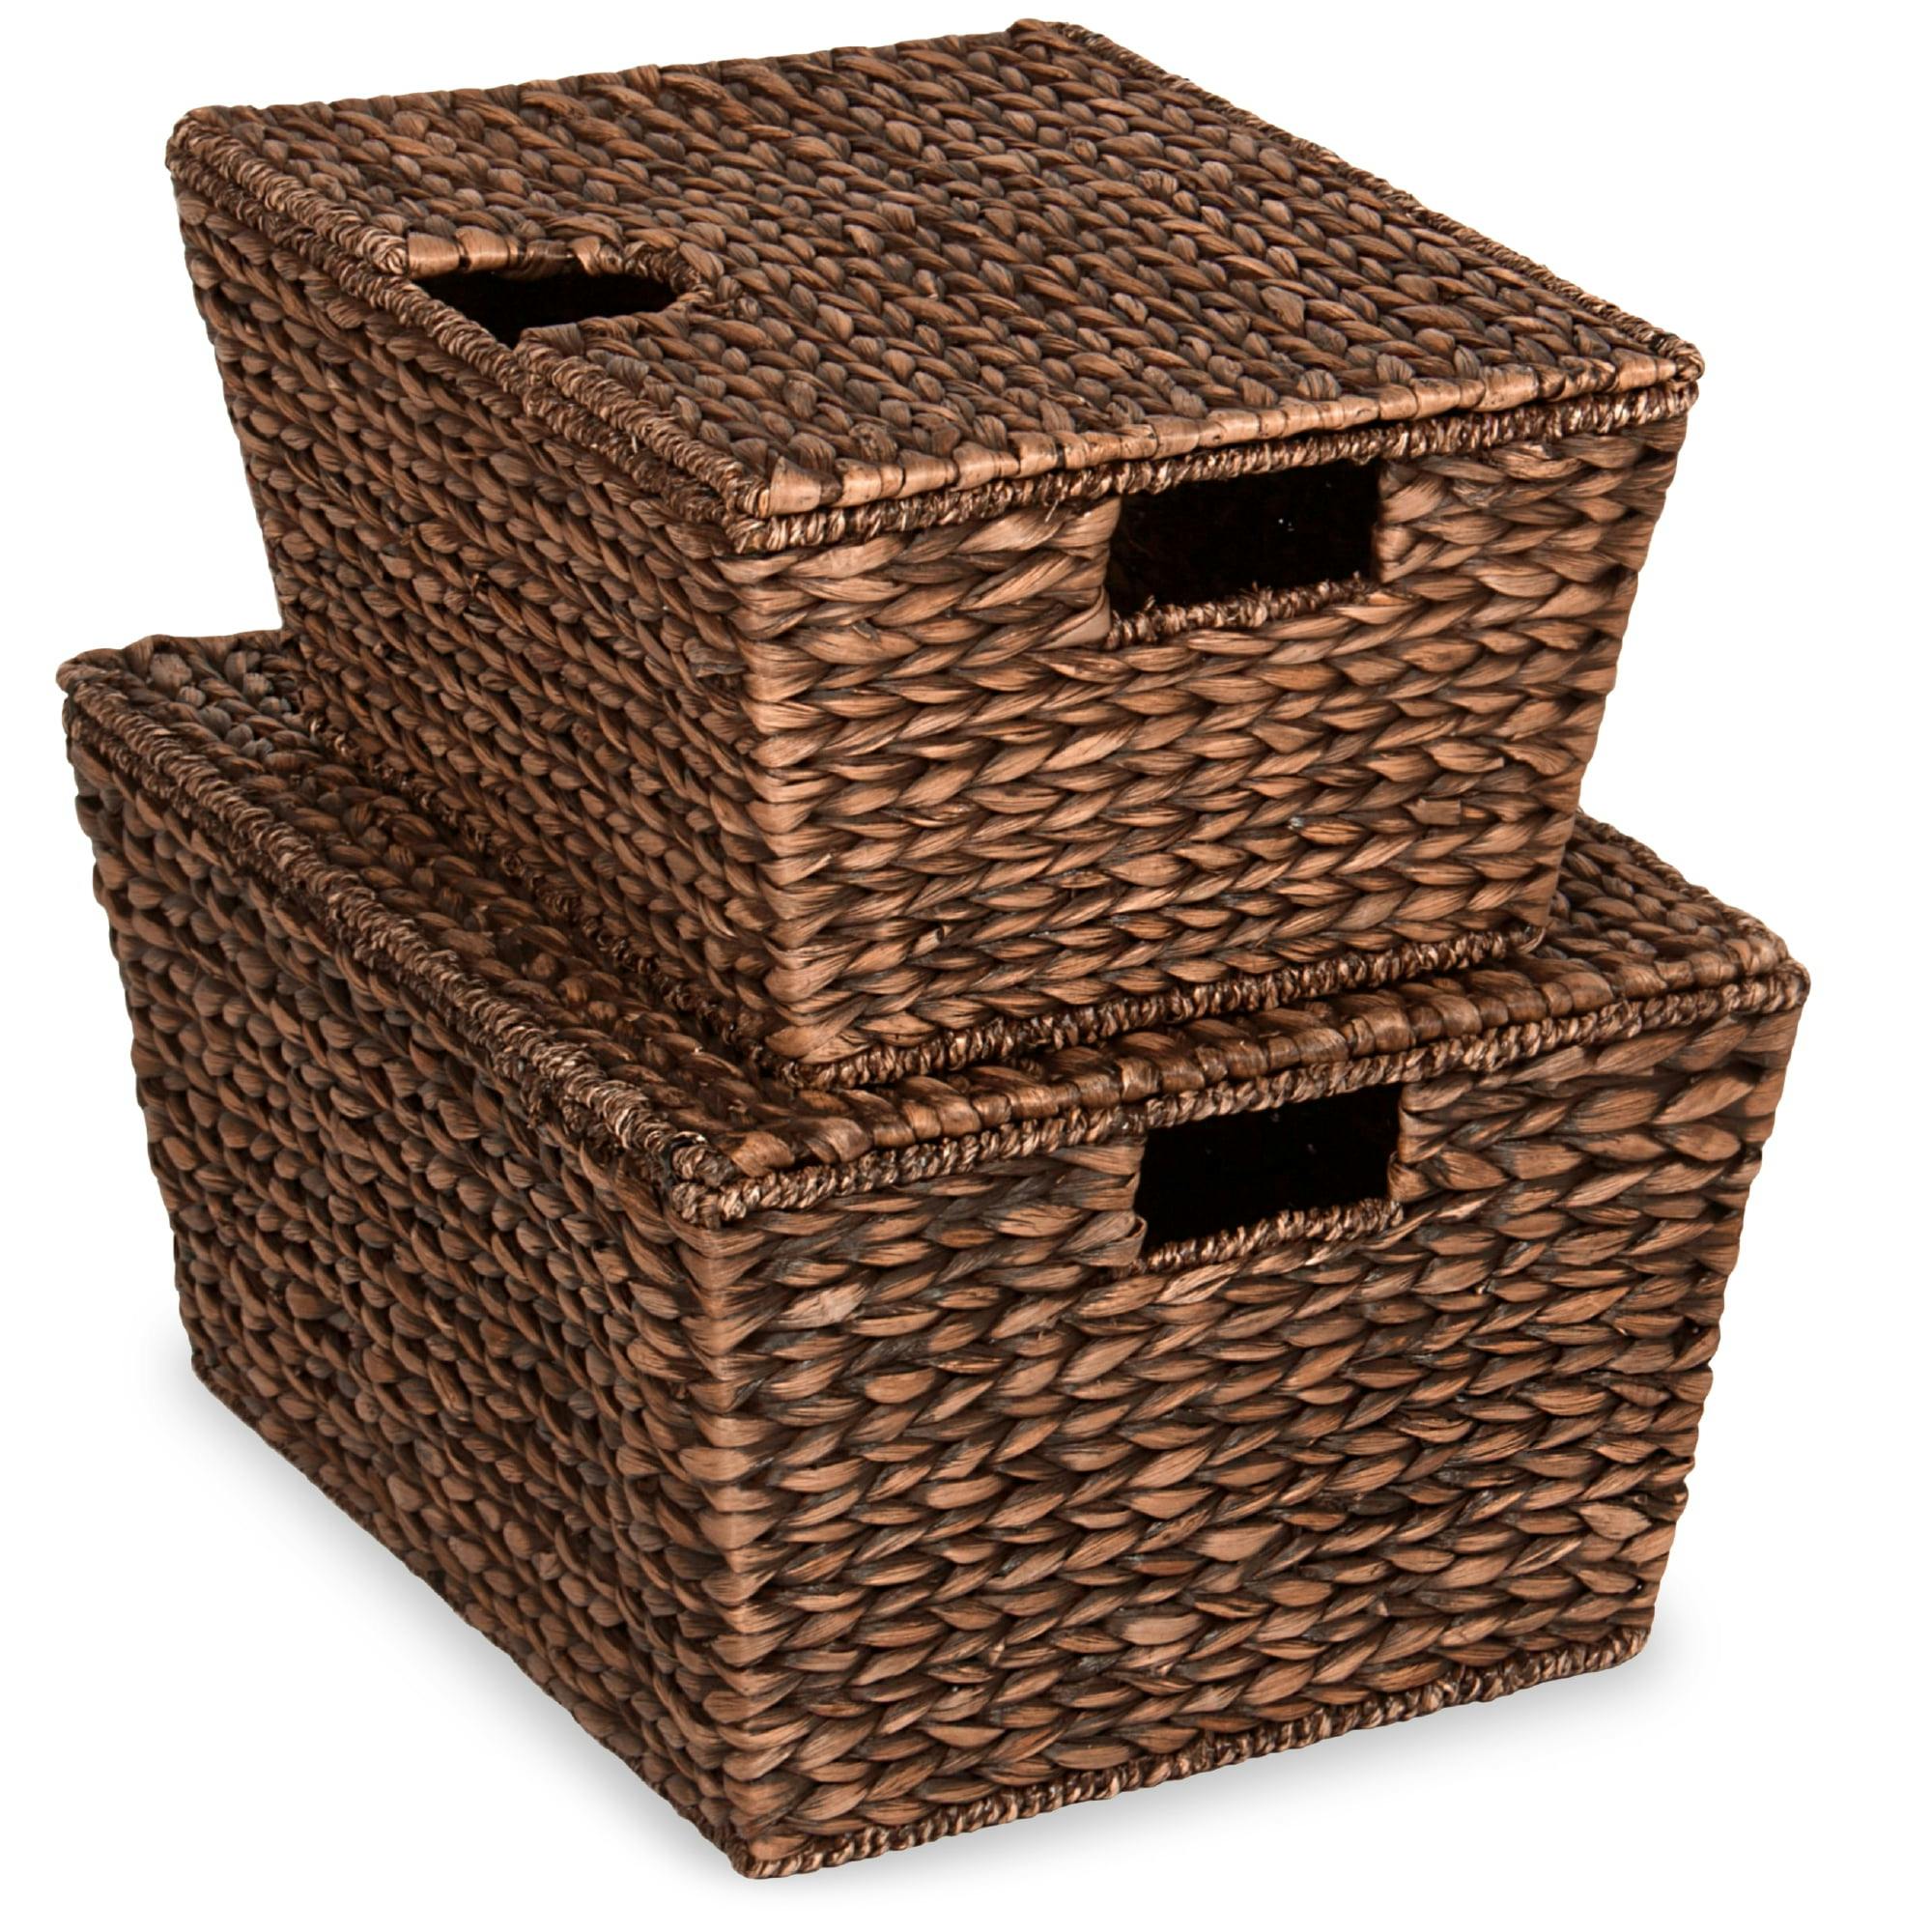 XL Handwoven Water Hyacinth Storage Baskets with Lids, Set of 2